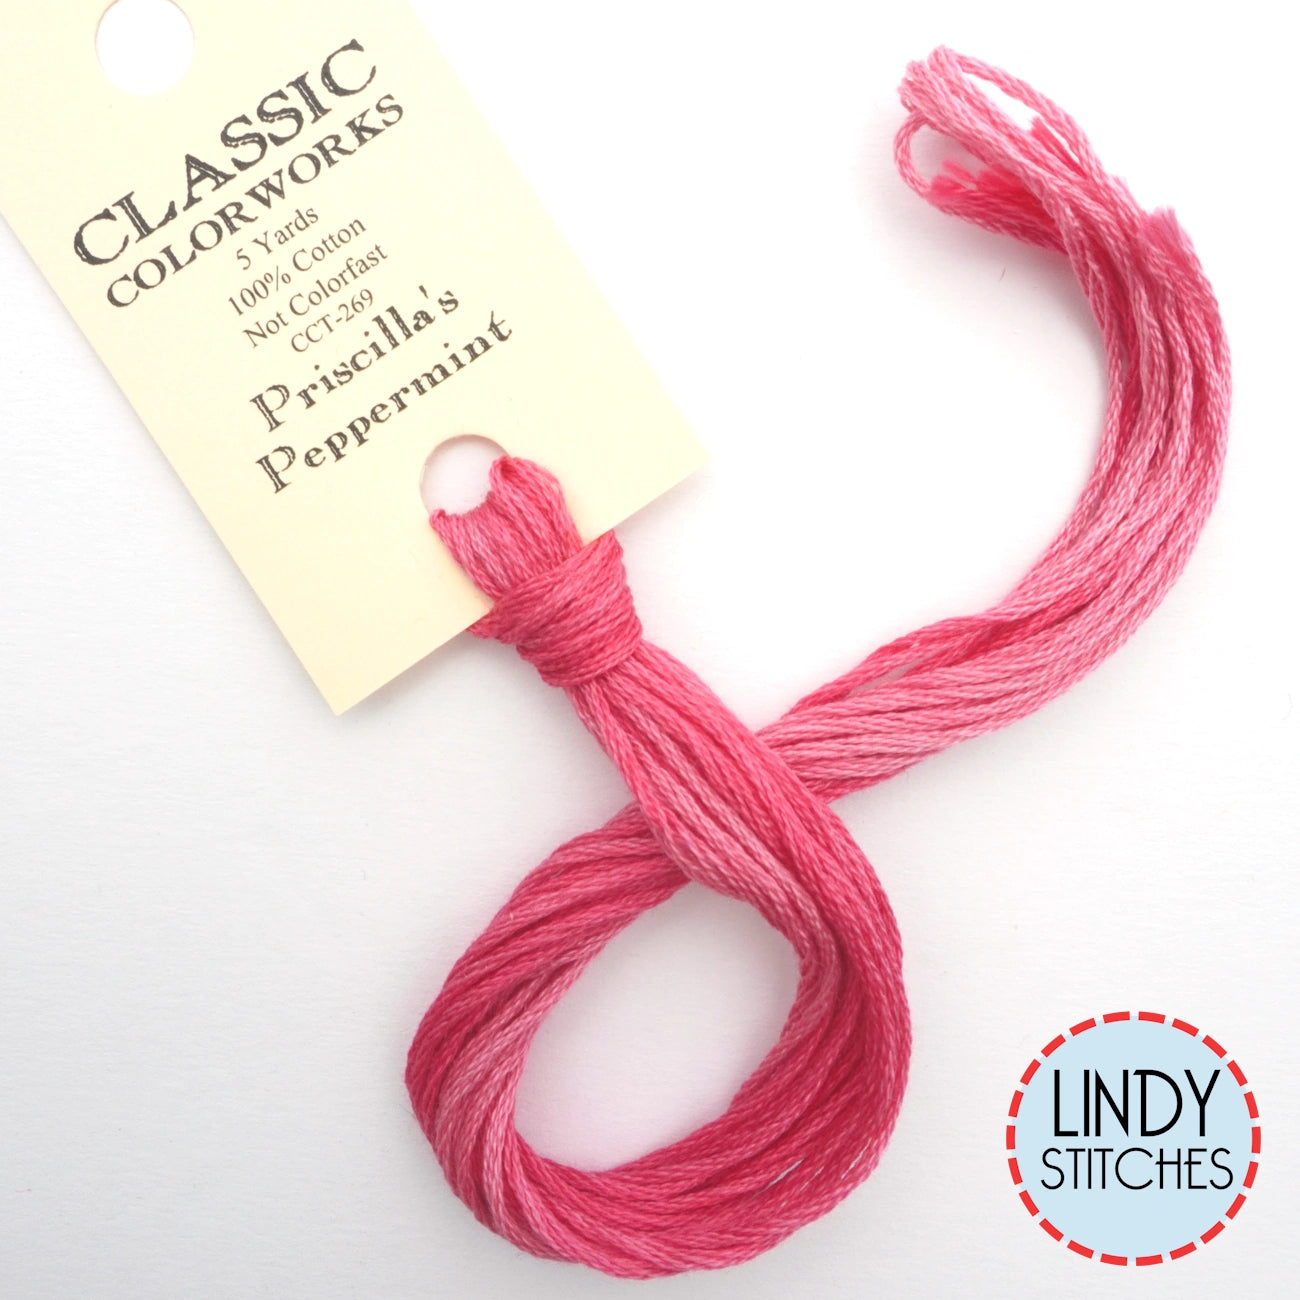 Priscilla's Peppermint Classic Colorworks Floss Hand Dyed Cotton Skein